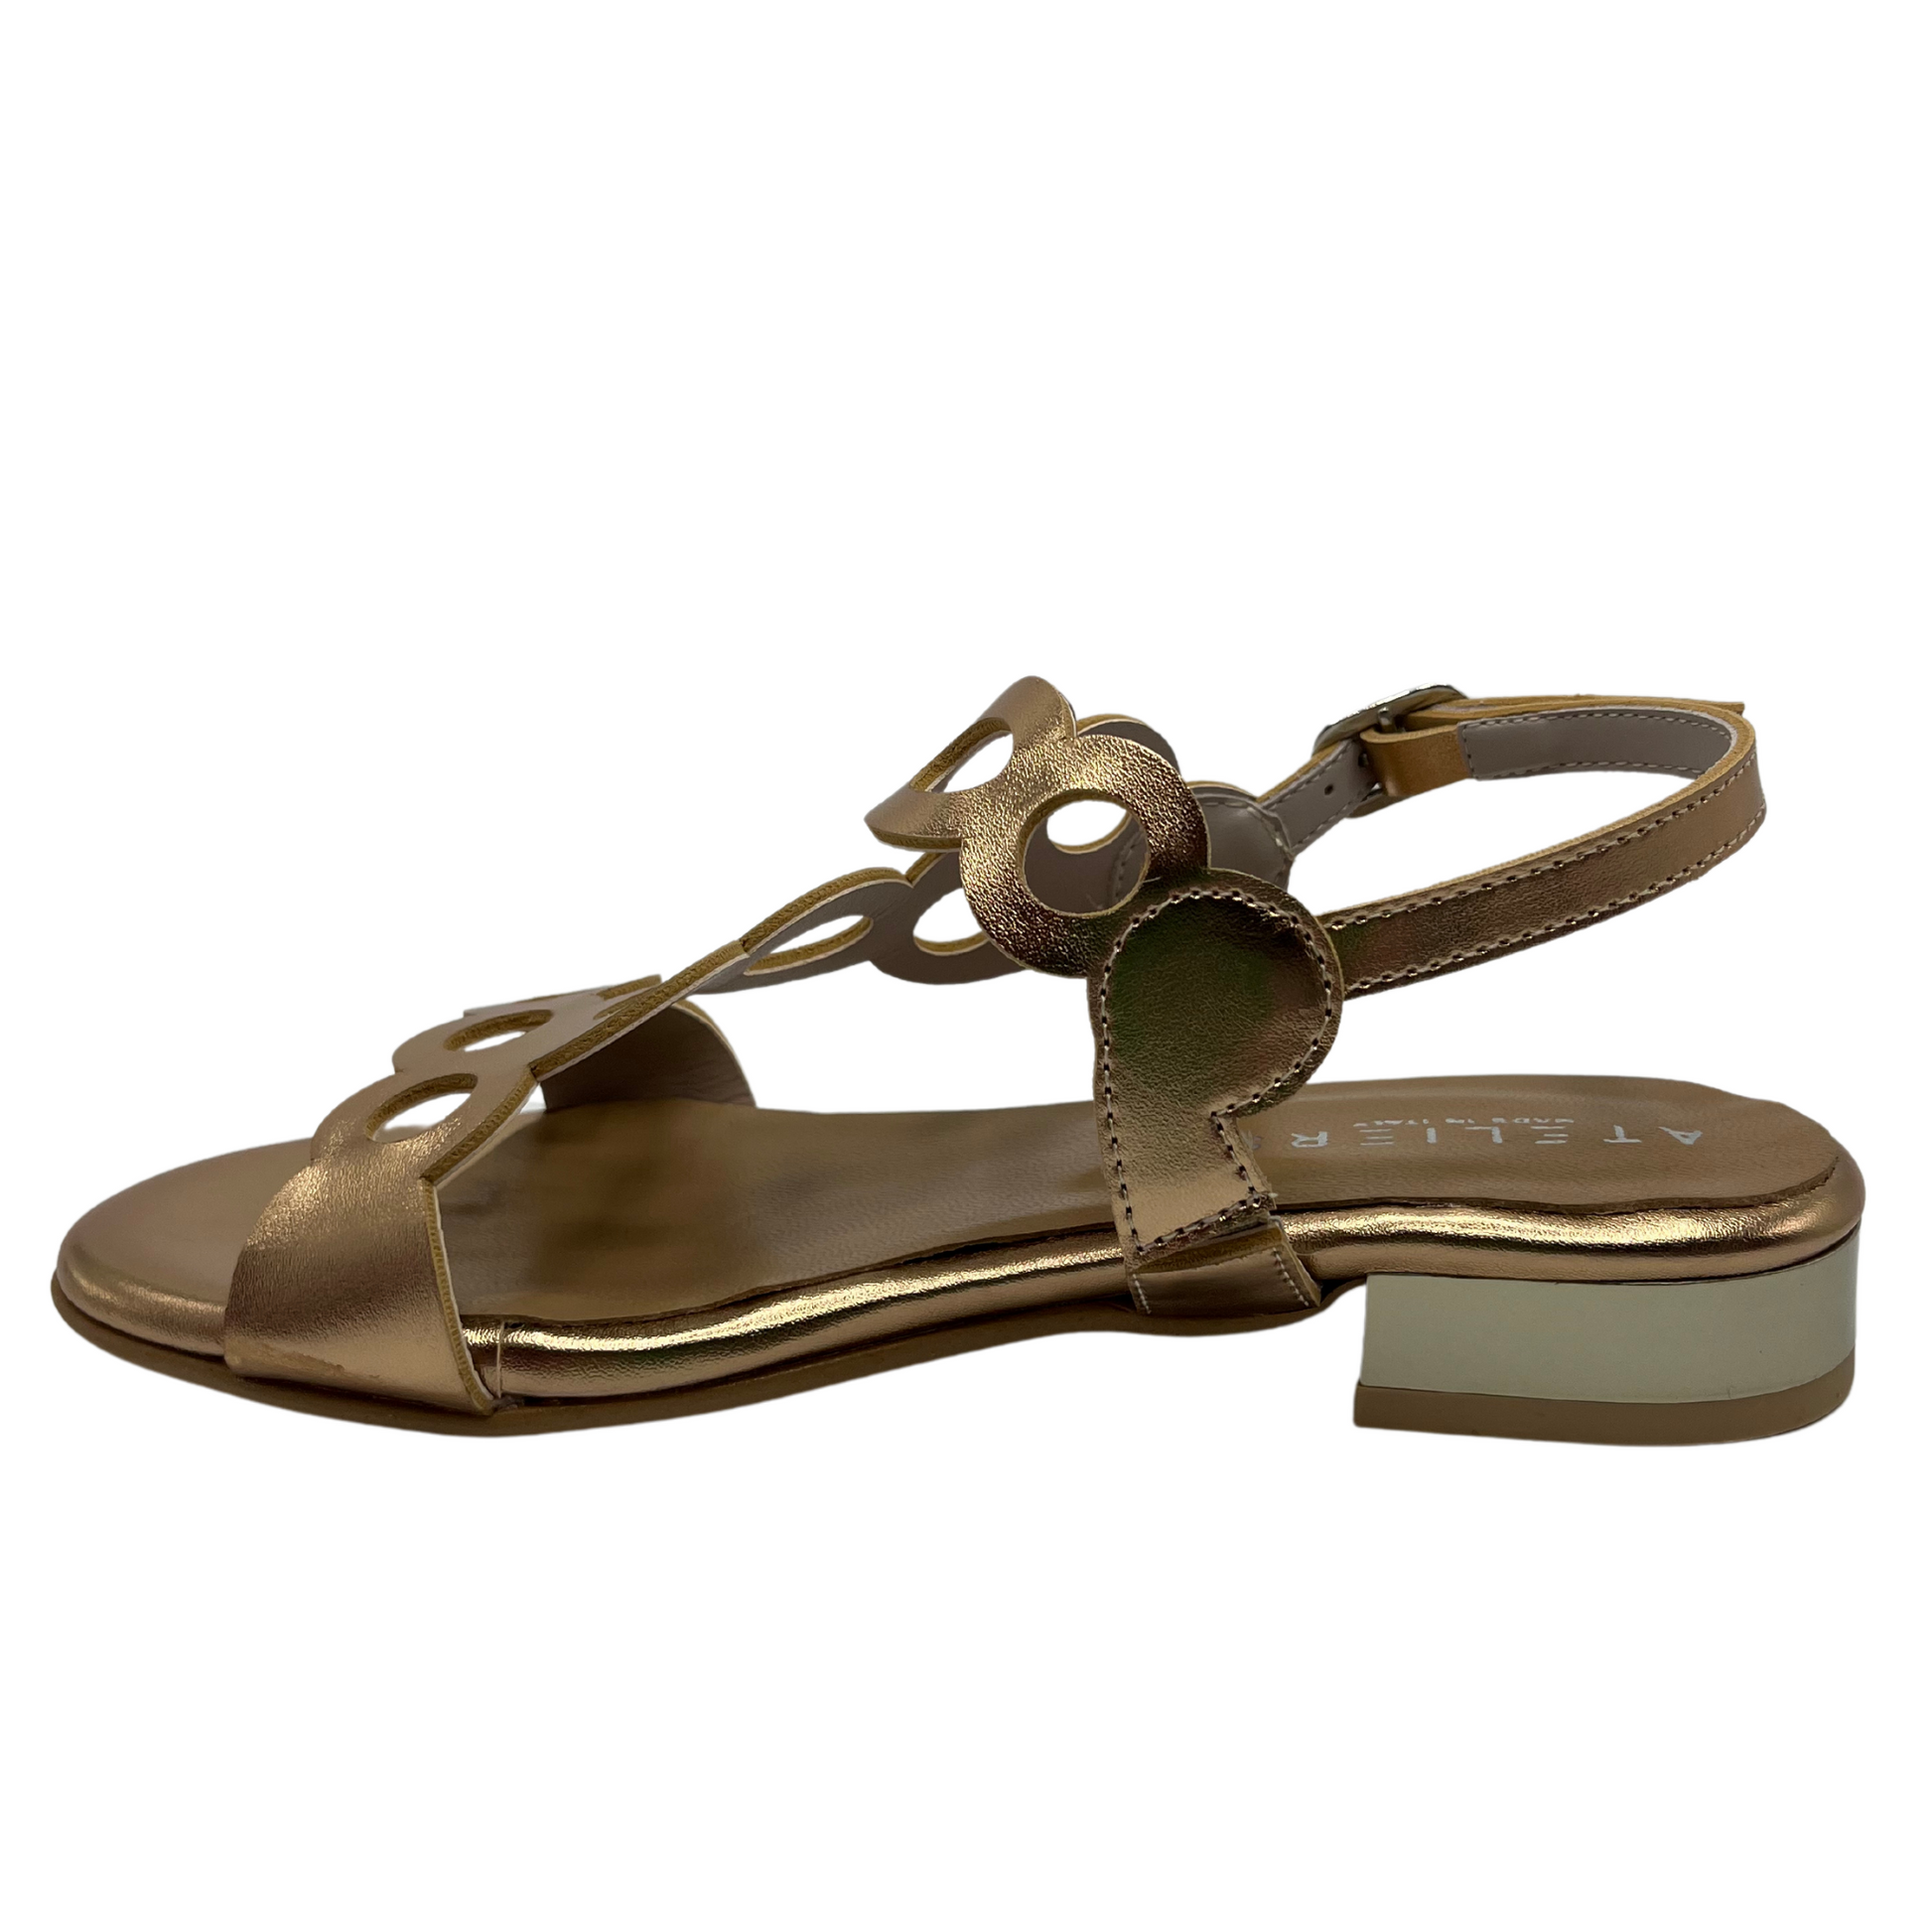 Left view of cut out leather sandal in metallic gold with a delicate ankle buckle strap and short block heel